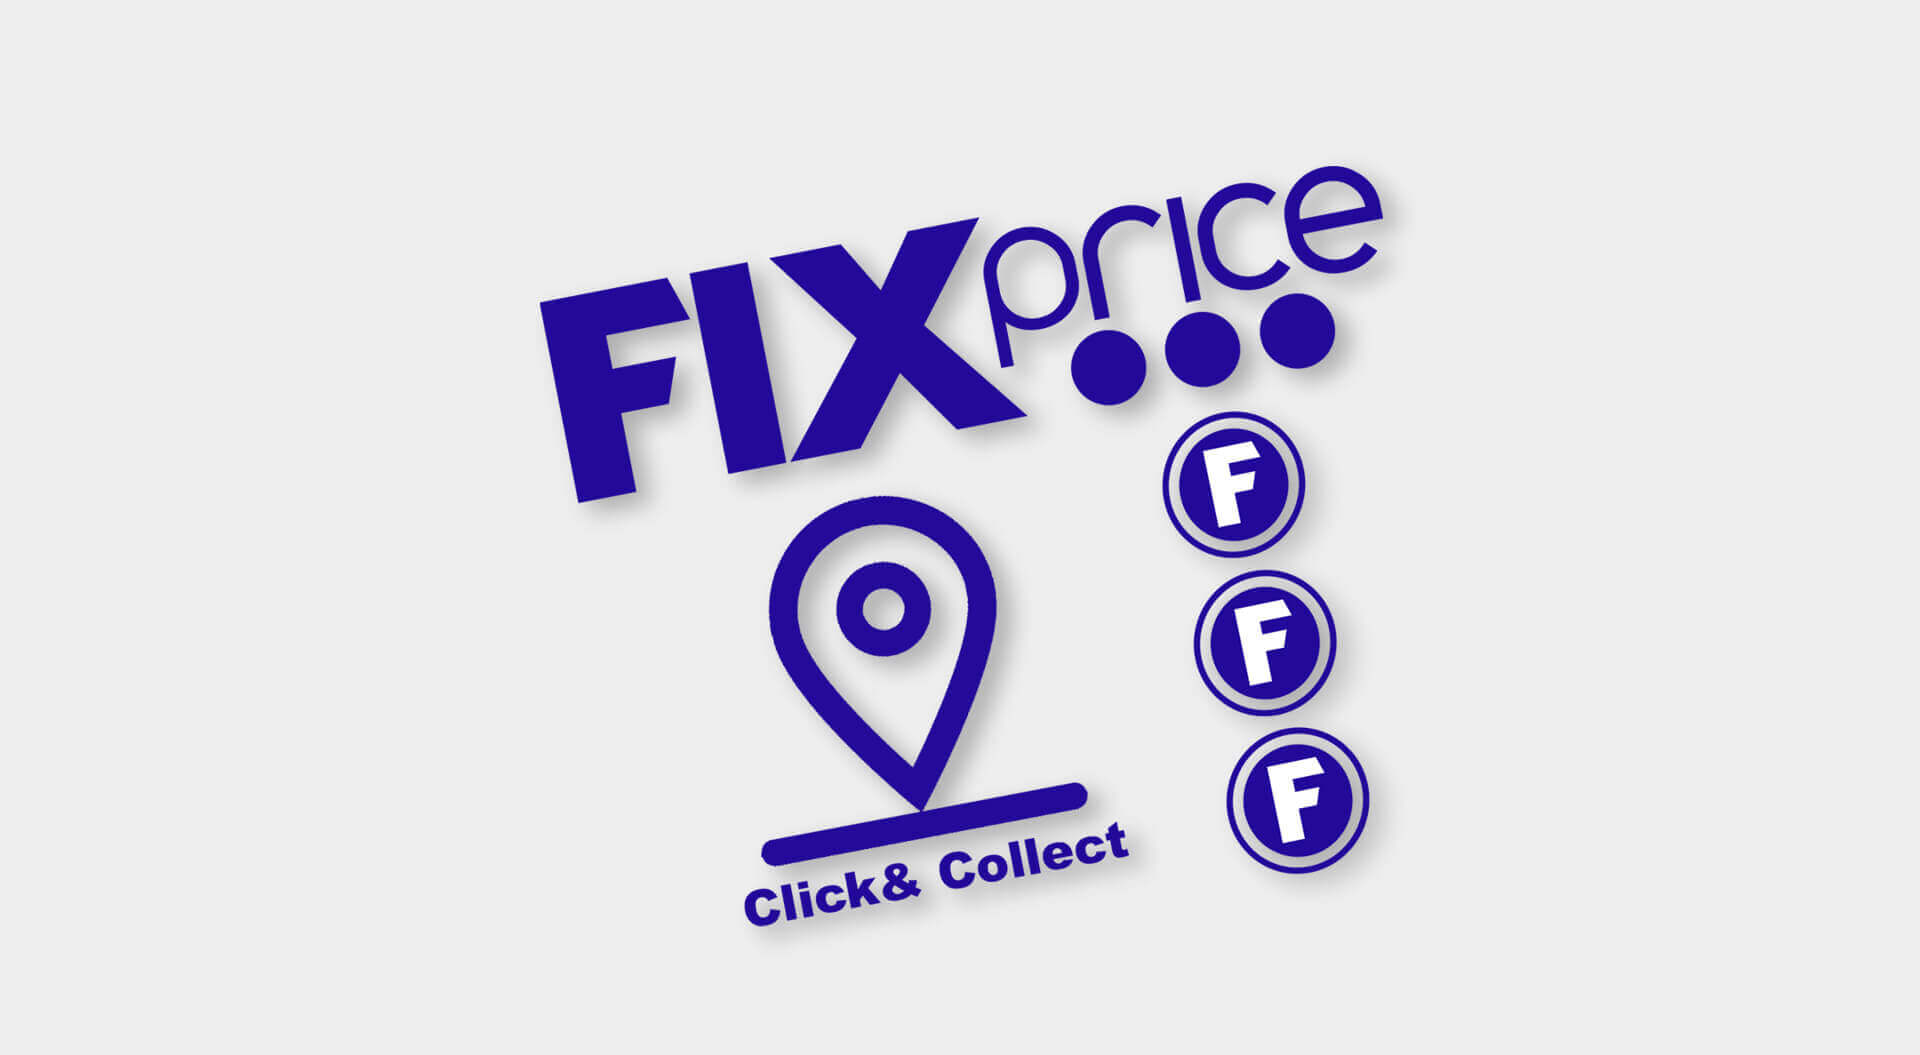 Fix Price Russia, Icon Design for Same Day Delivery Promotion, Retail Branding, Brand Identity, Graphic Communications - CampbellRigg Agency